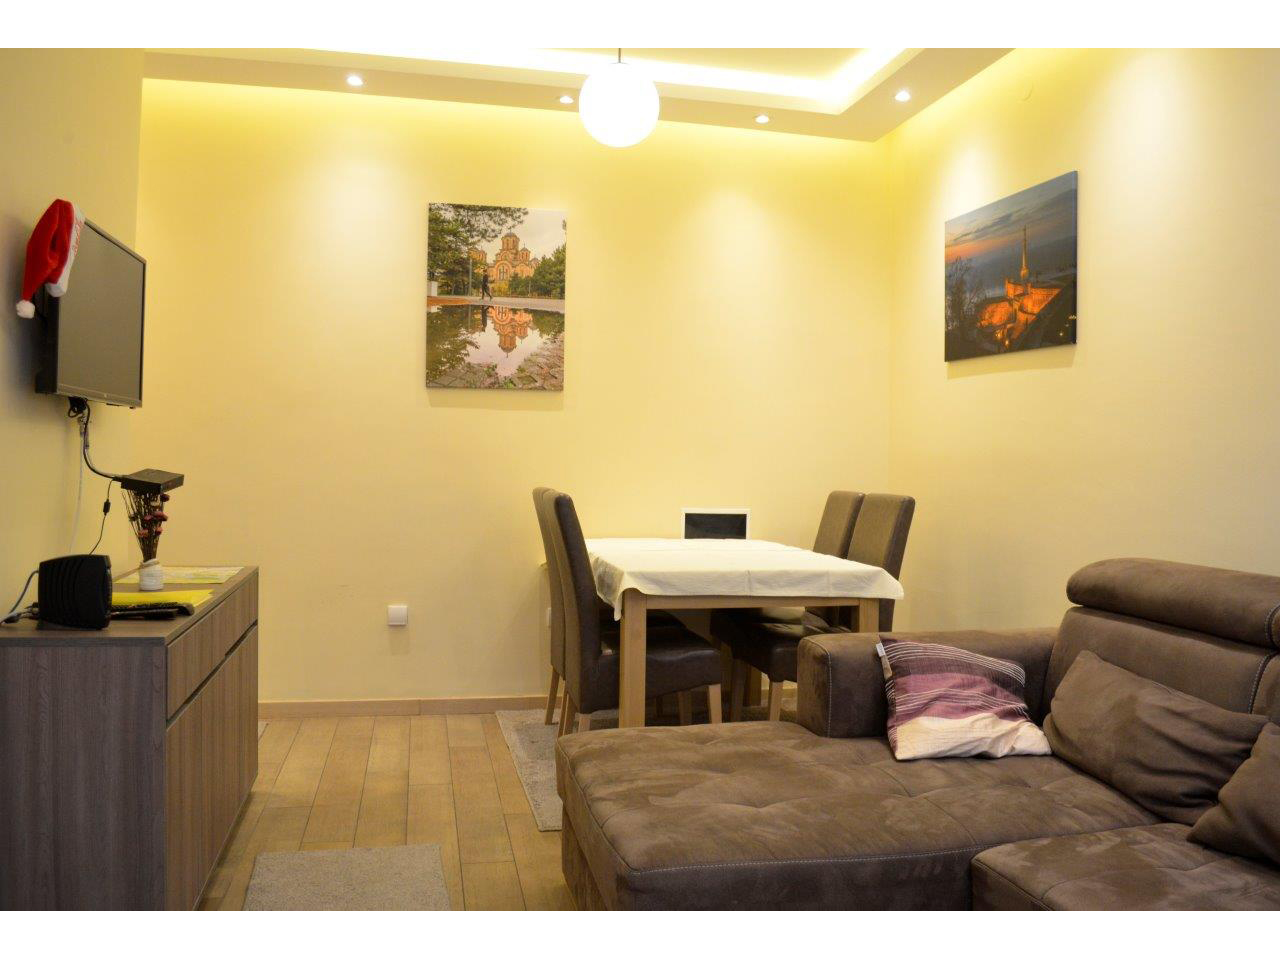 1A MOMENT APARTMENT Accommodation, room renting Belgrade - Photo 3